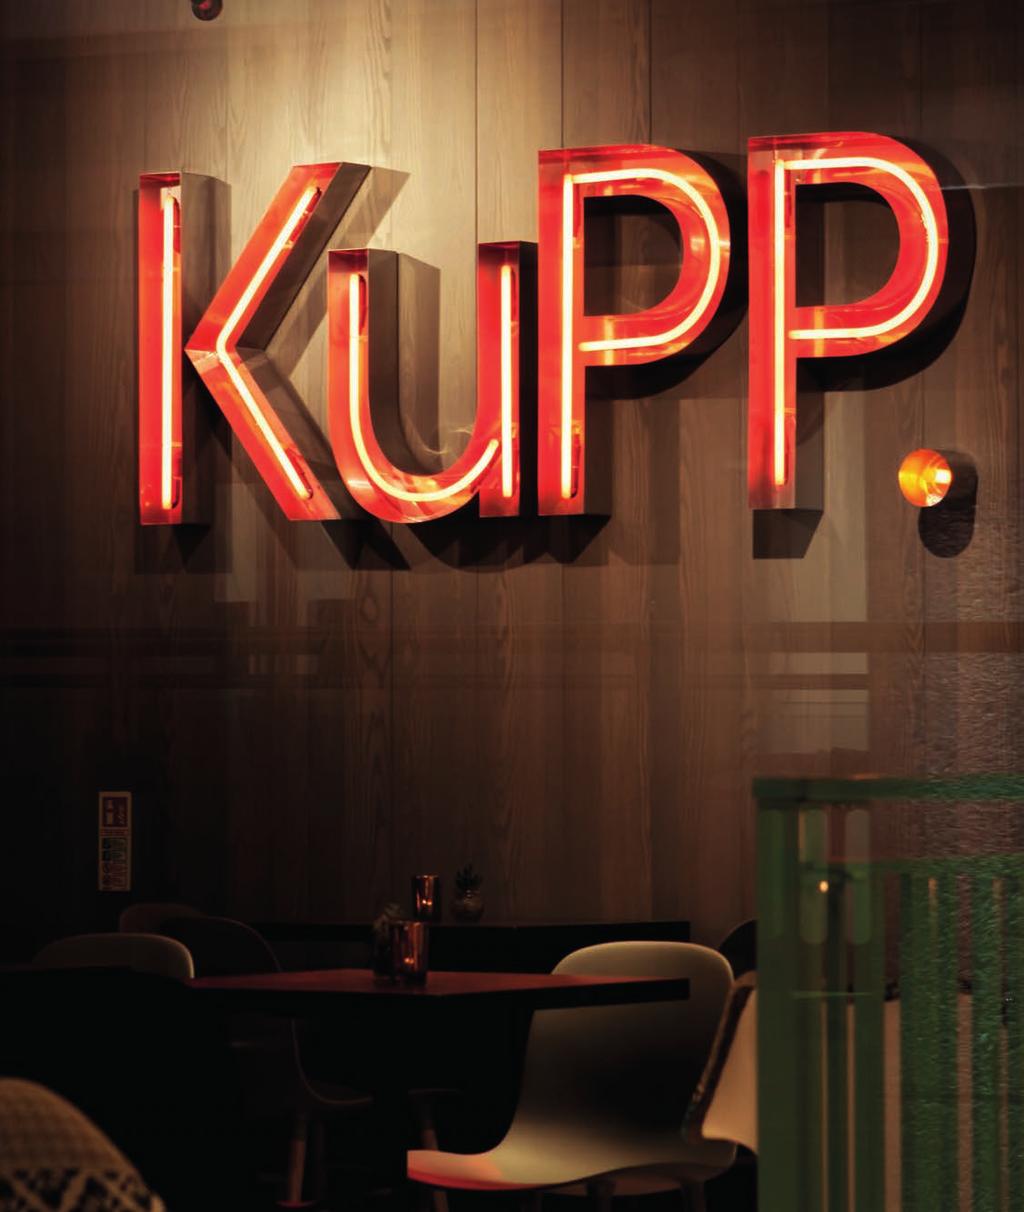 Kupp is also renowned for its four large silver tanks, the first of their kind in the UK, that sit above the bar holding the Czech Pilsner, Krusovice.